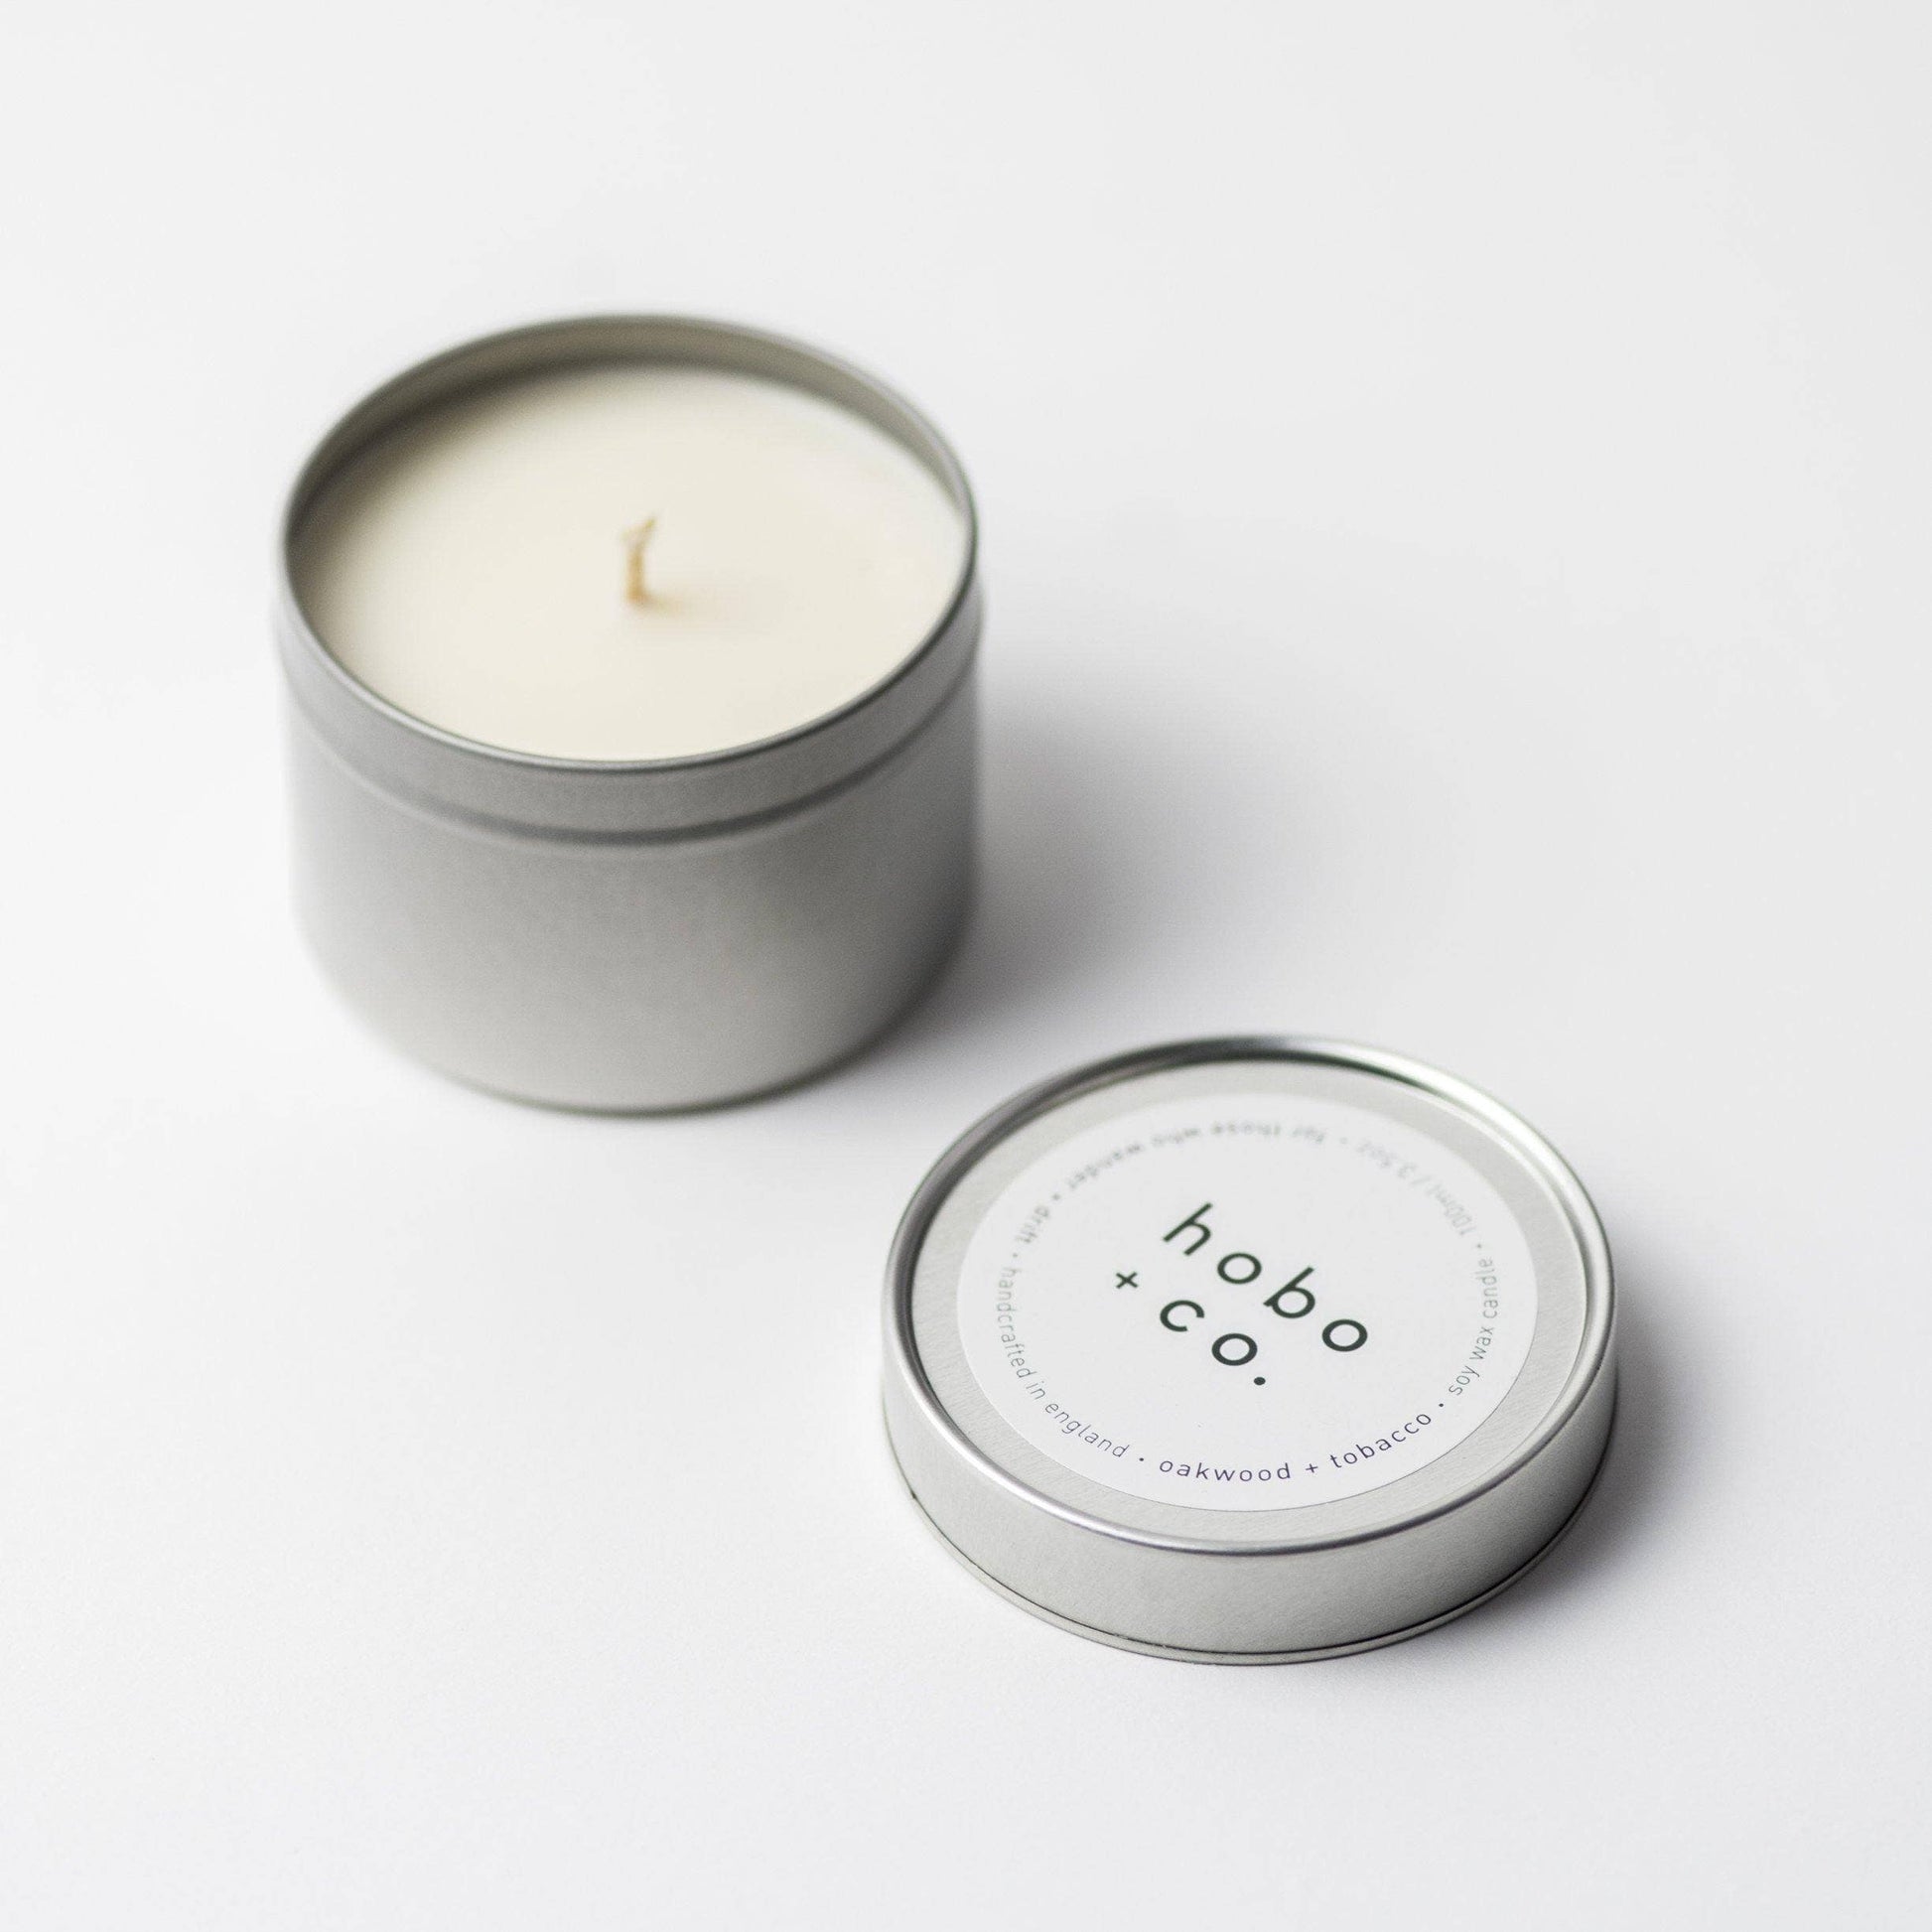 Hobo+Co Oakwood & Tobacco Travel Tin Soy Wax Candle at Joetie Home Fragrance. Luxury Handmade Apothecary Soy Candles